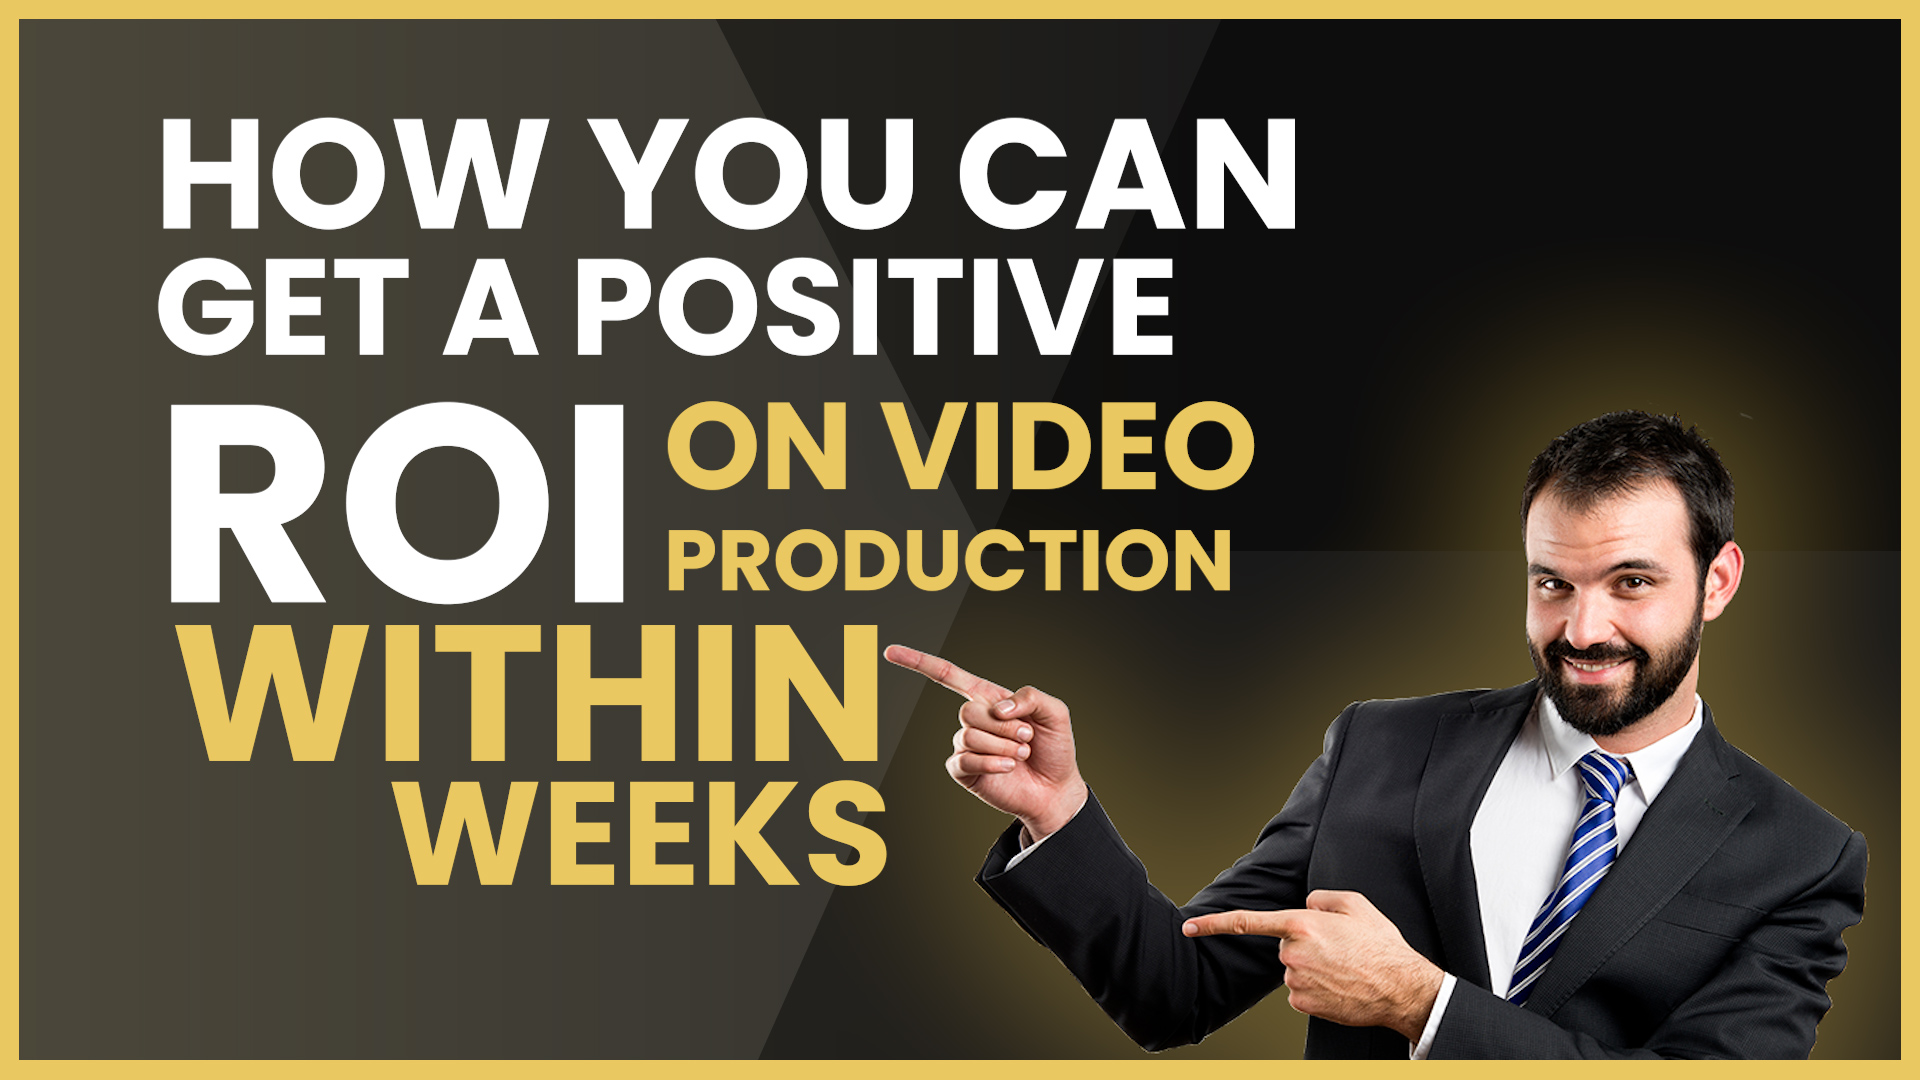 How you can get a positive ROI on video production within weeks